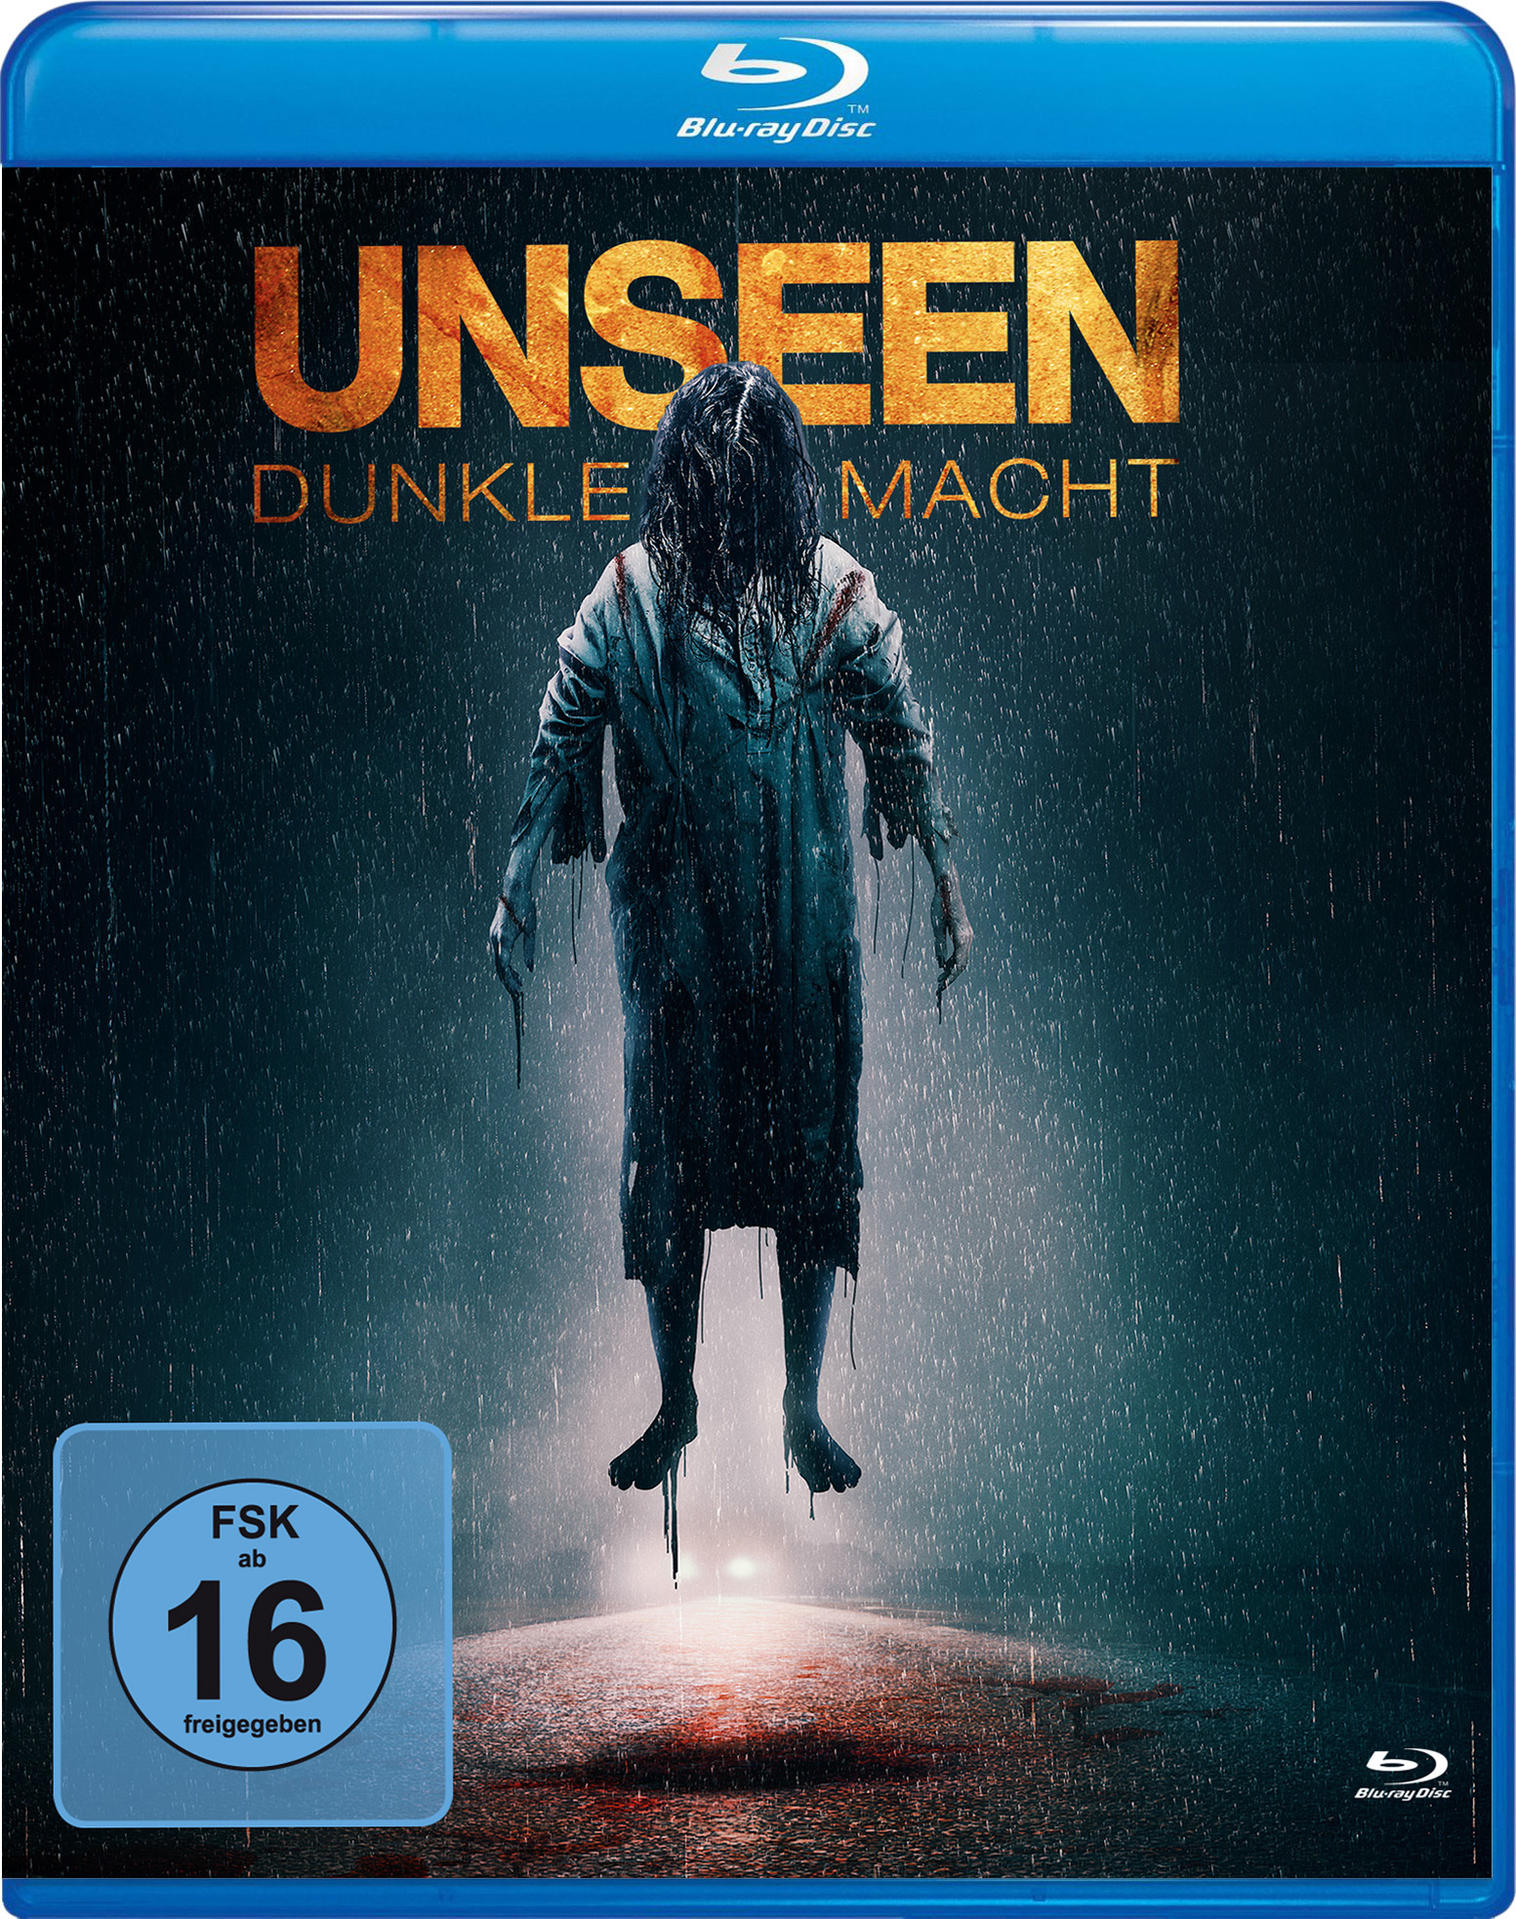 - Blu-ray Macht Dunkle Unseen